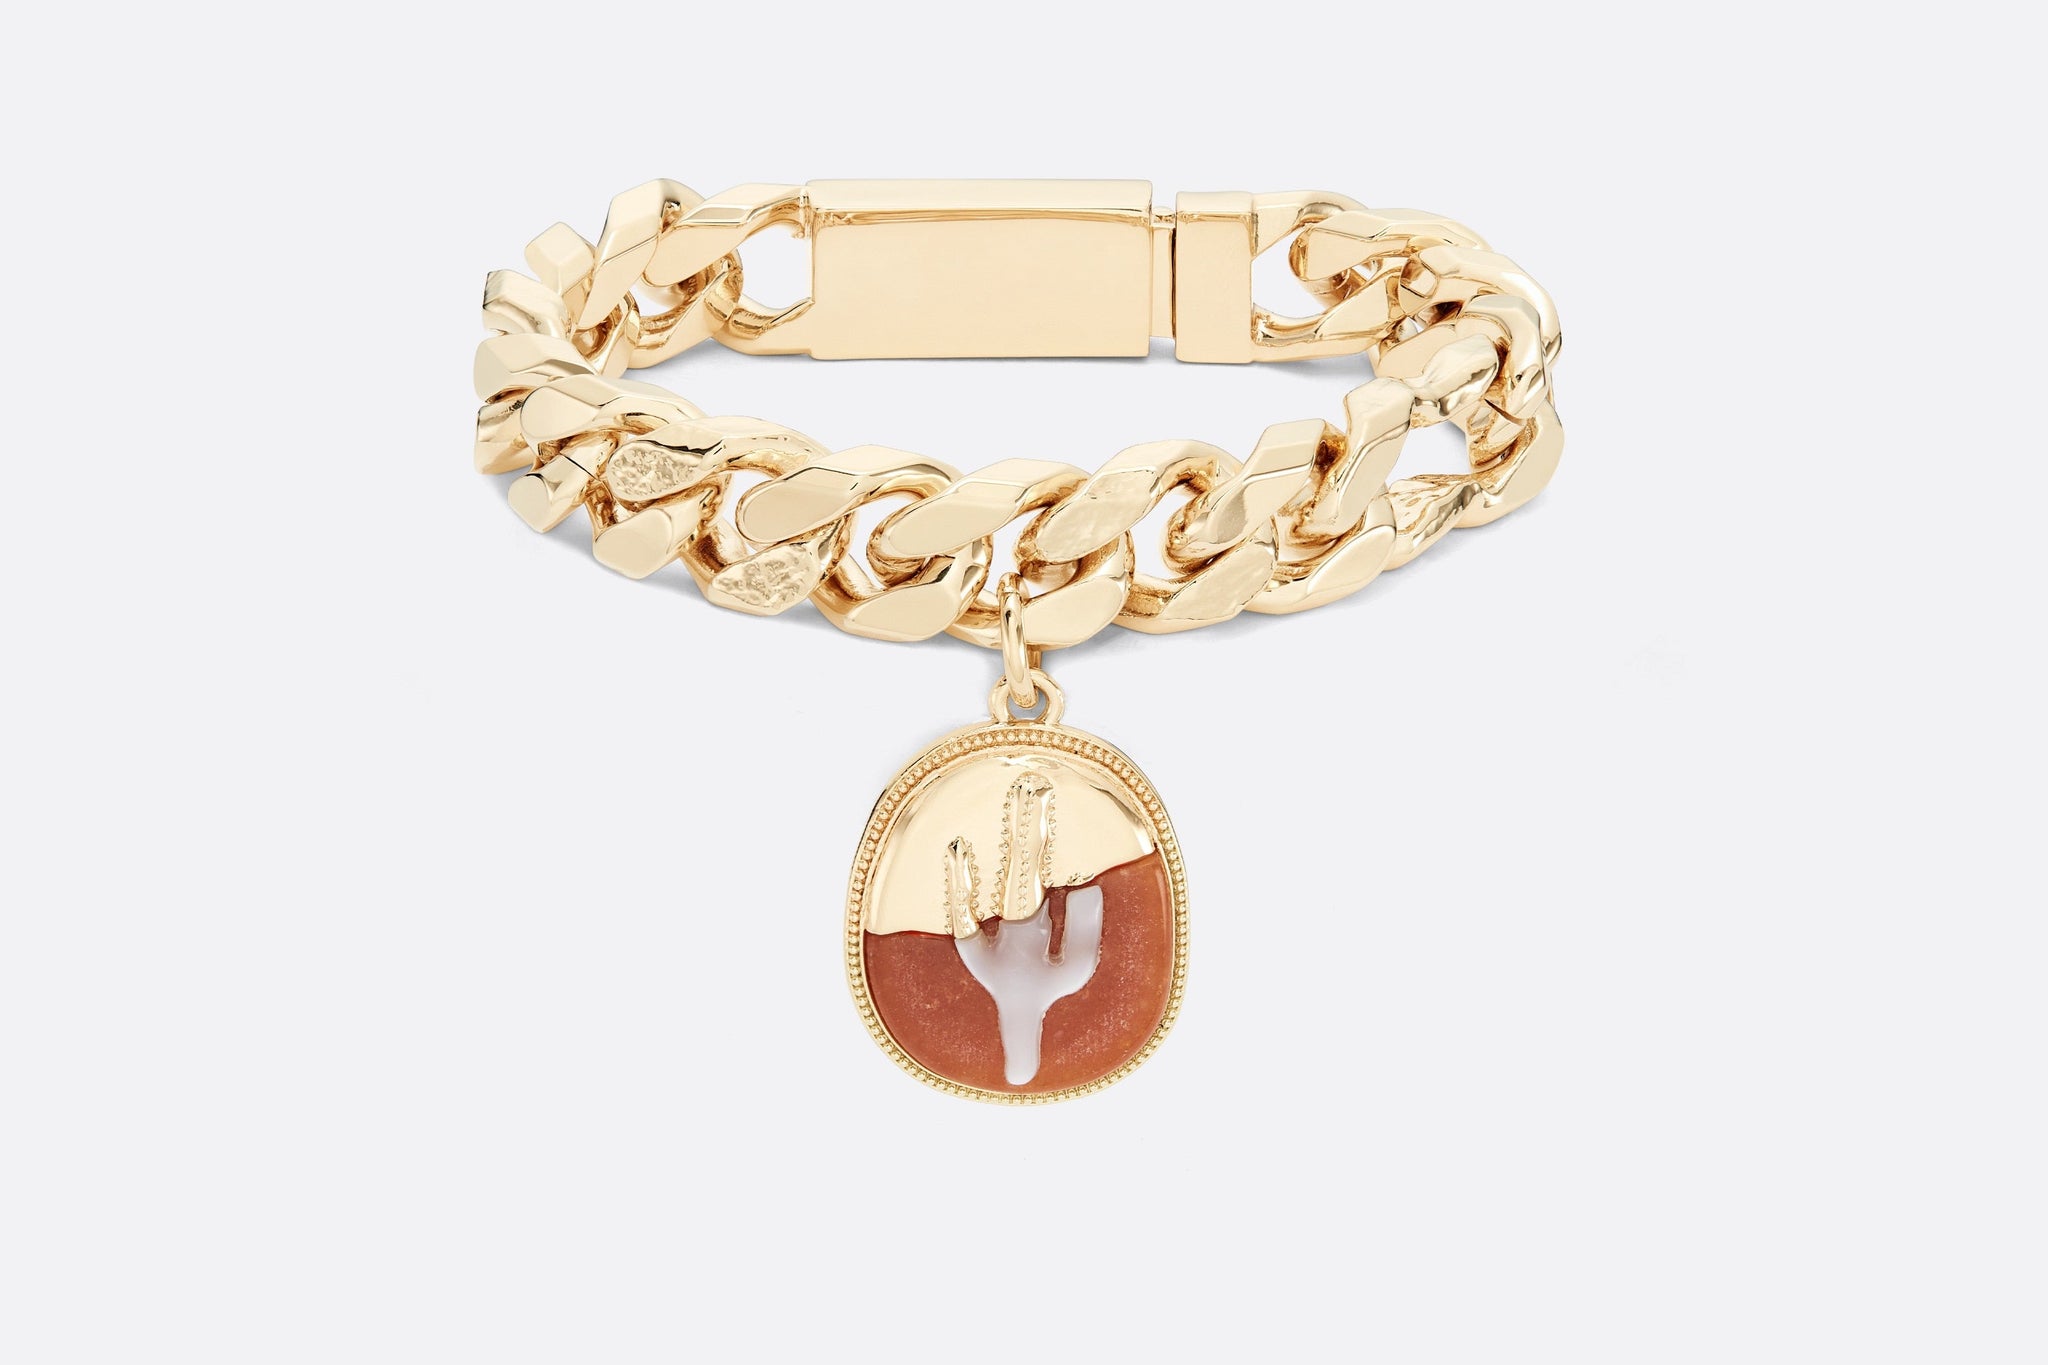 CACTUS JACK DIOR Chain Link Bracelet • Gold-Finish Brass with Orange  Aventurine and White Mother-of-Pearl